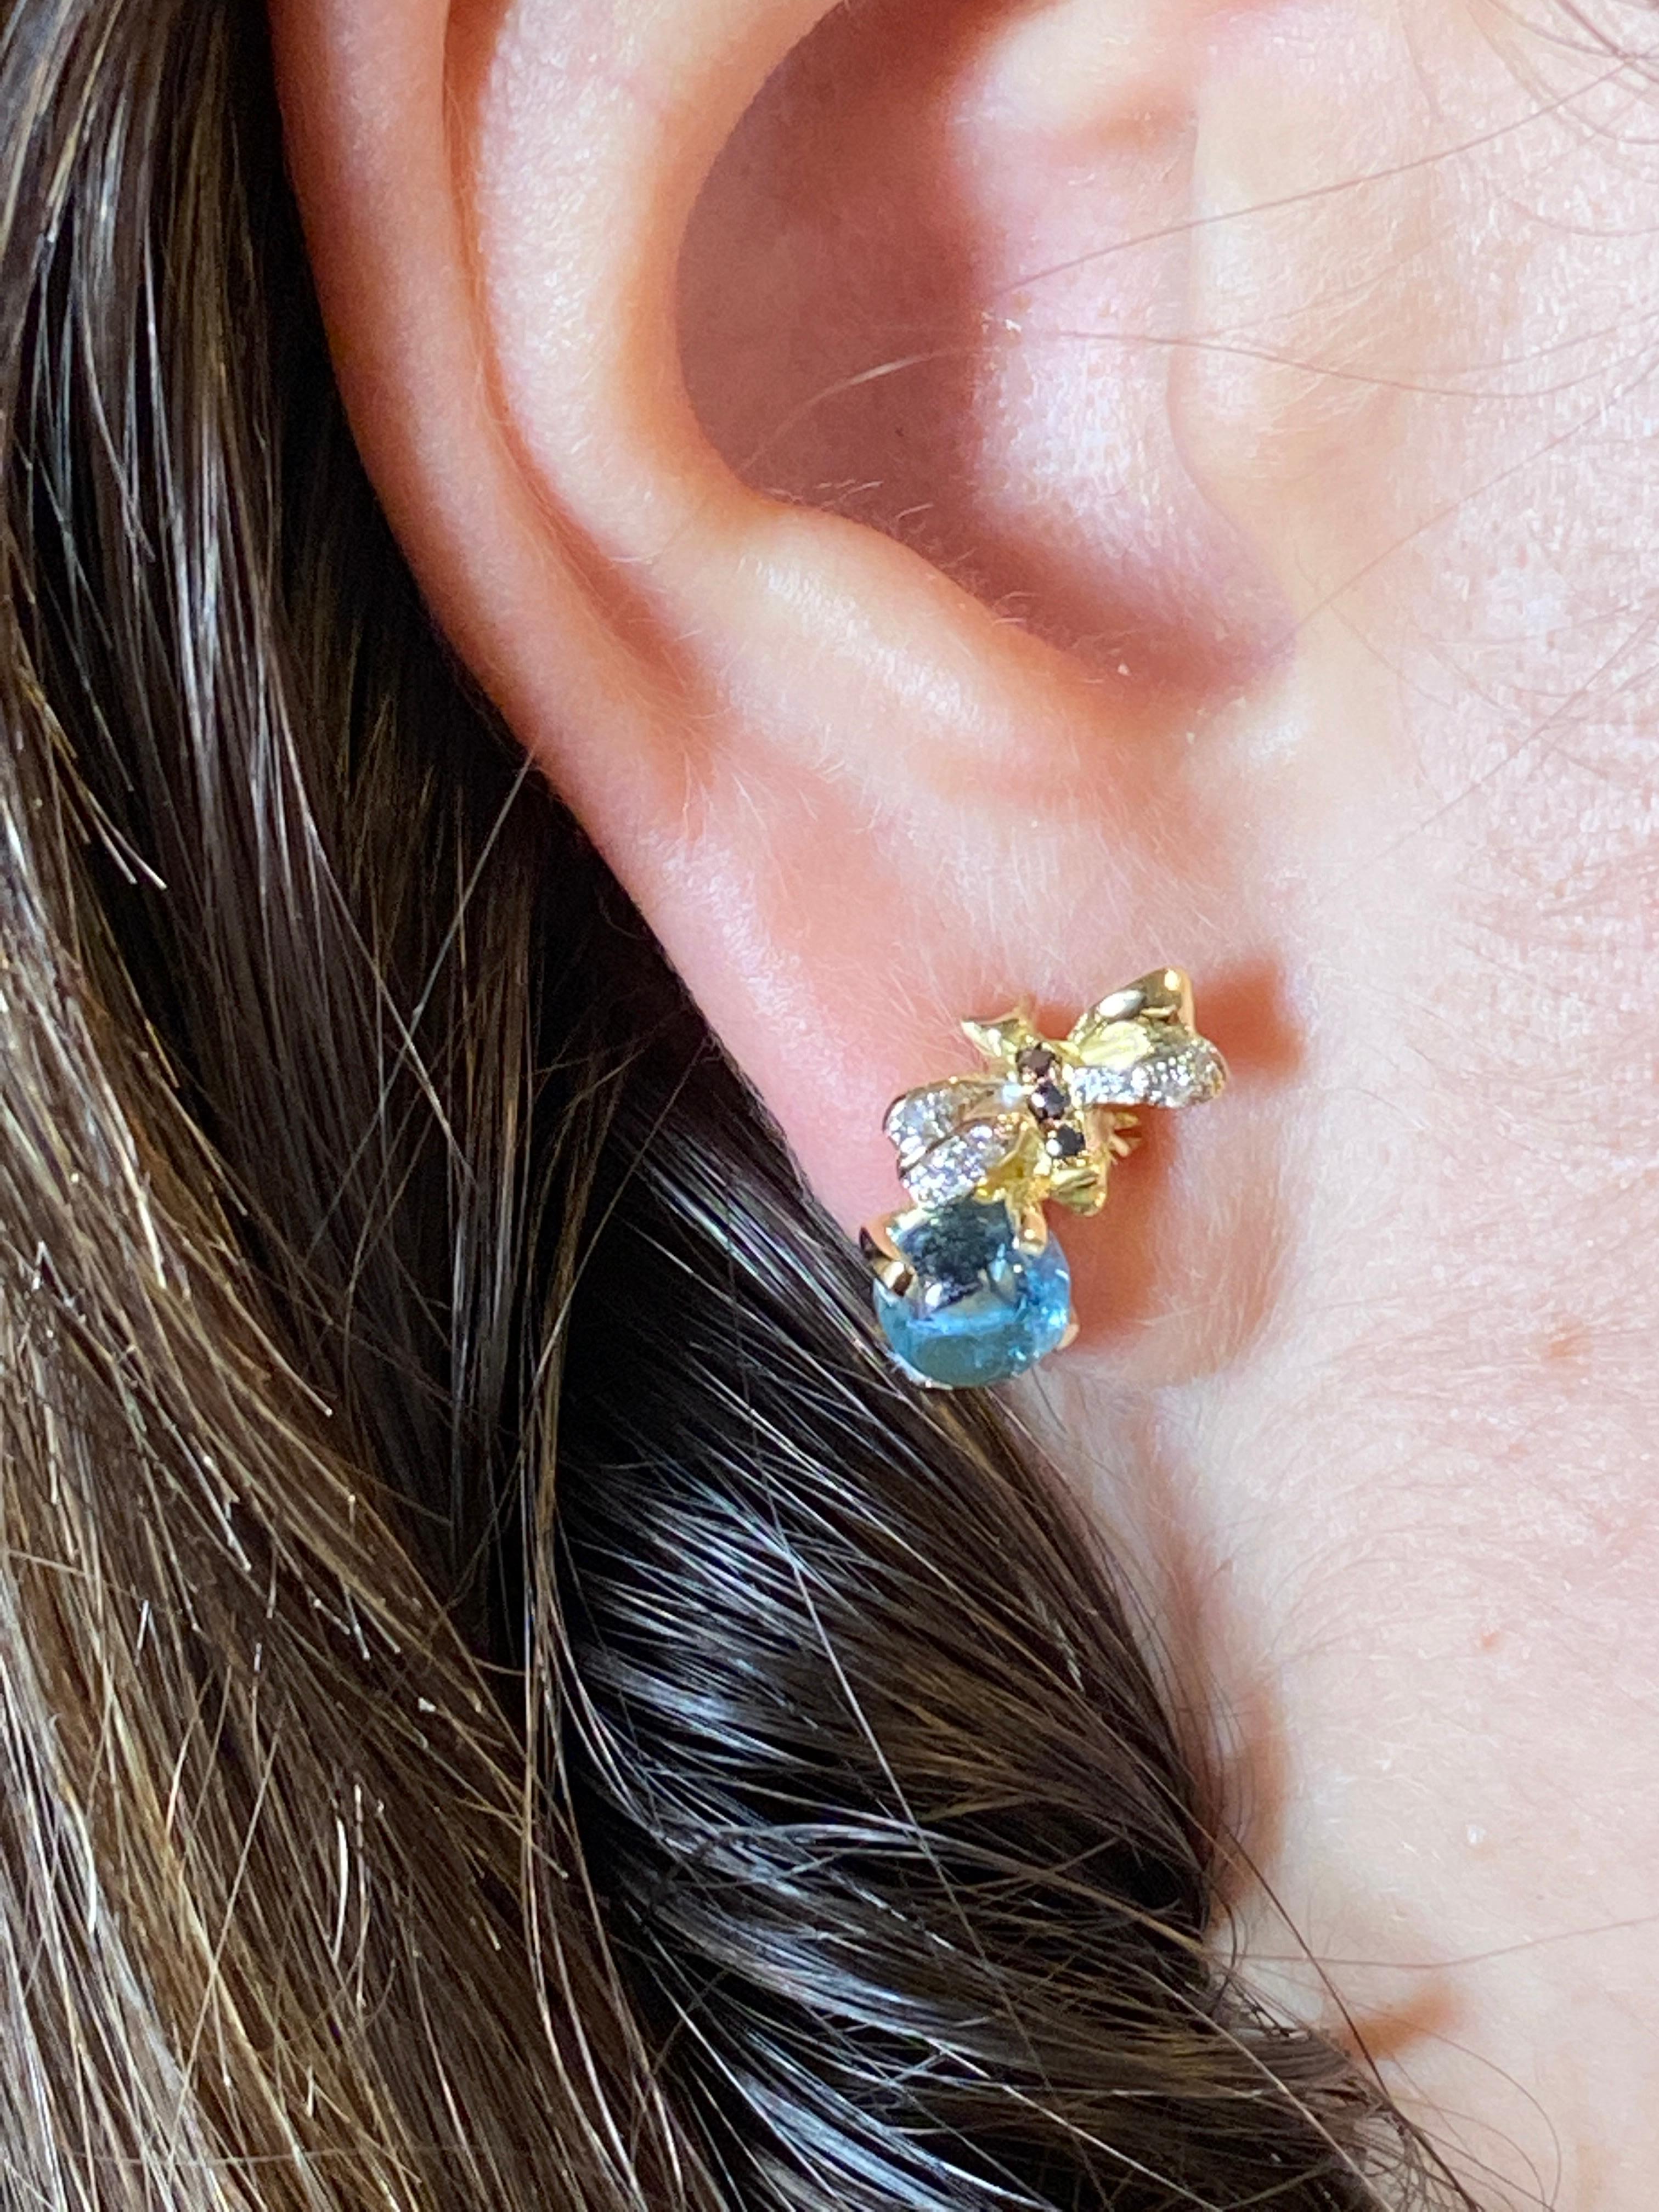 Rossella Ugolini's bee-shaped stud earrings Handcrafted in Italy in 18k Yellow Gold, with 0.16 White and Black Diamonds and 2.20 Aquamarine, are a perfect blend of elegance and whimsy. 
The bee shape is inspired by the beauty and harmony of the